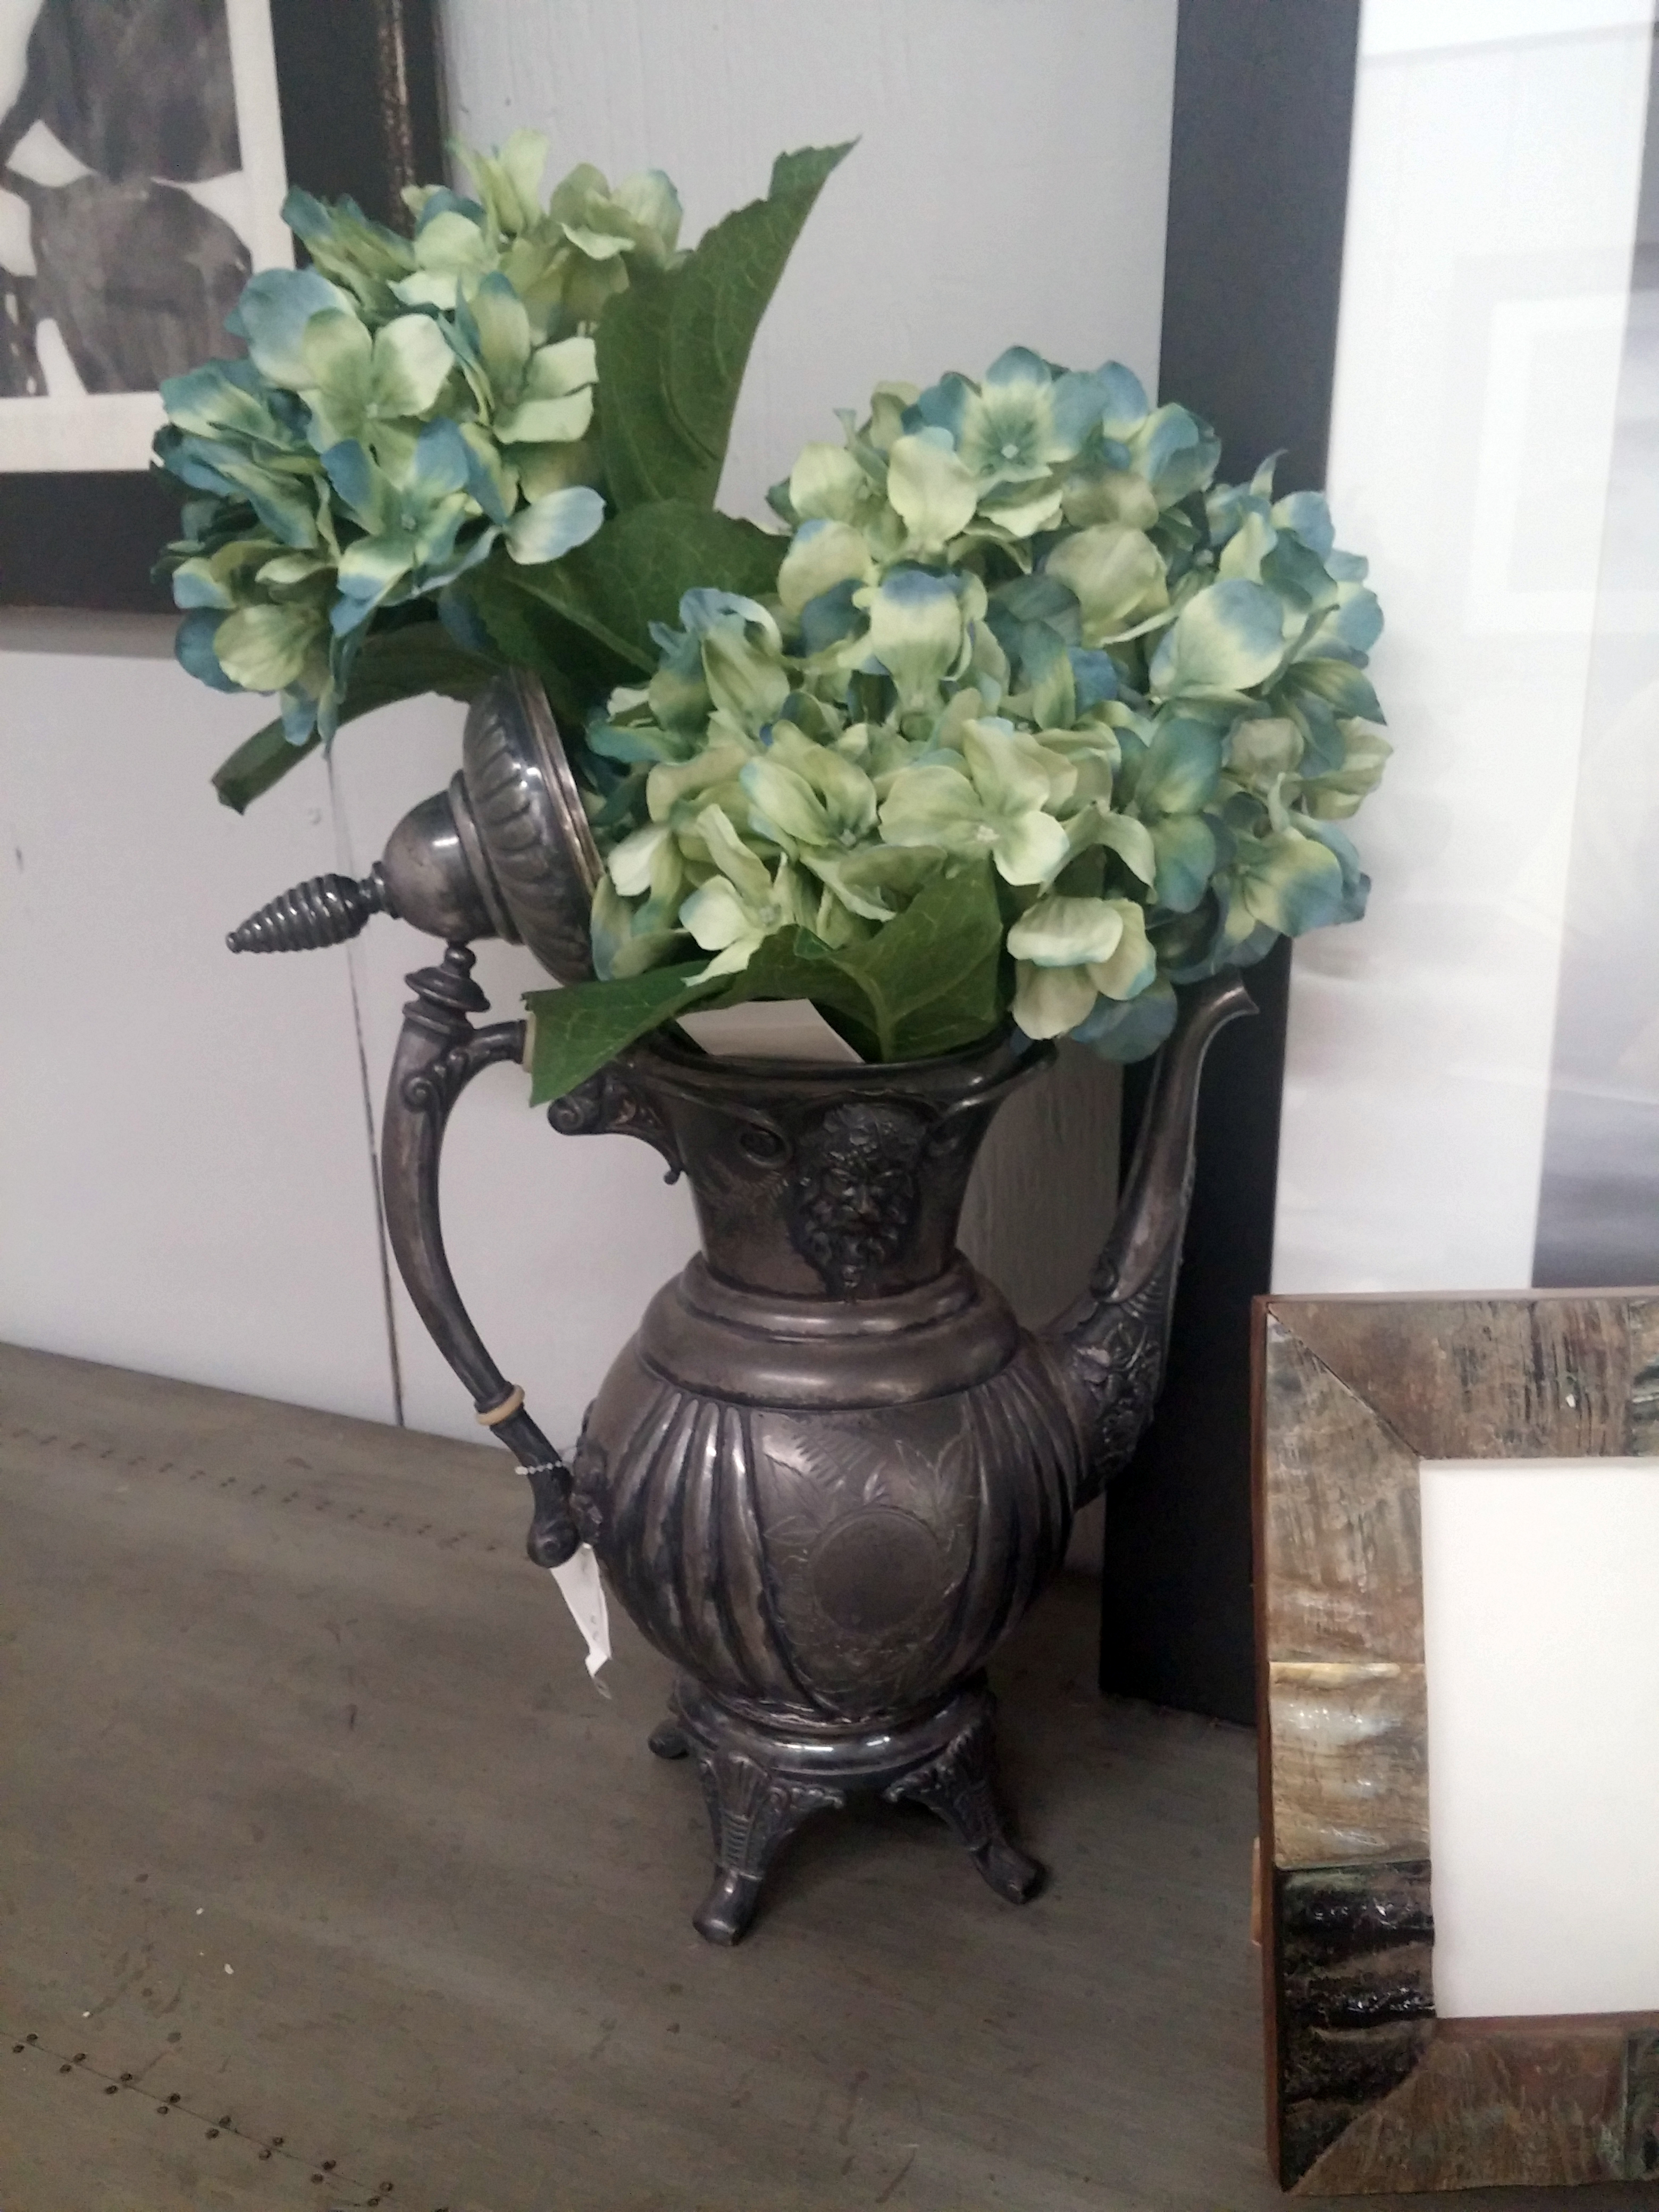 Add Uniqueness To Your Decor By Re-purposing Vintage Items!